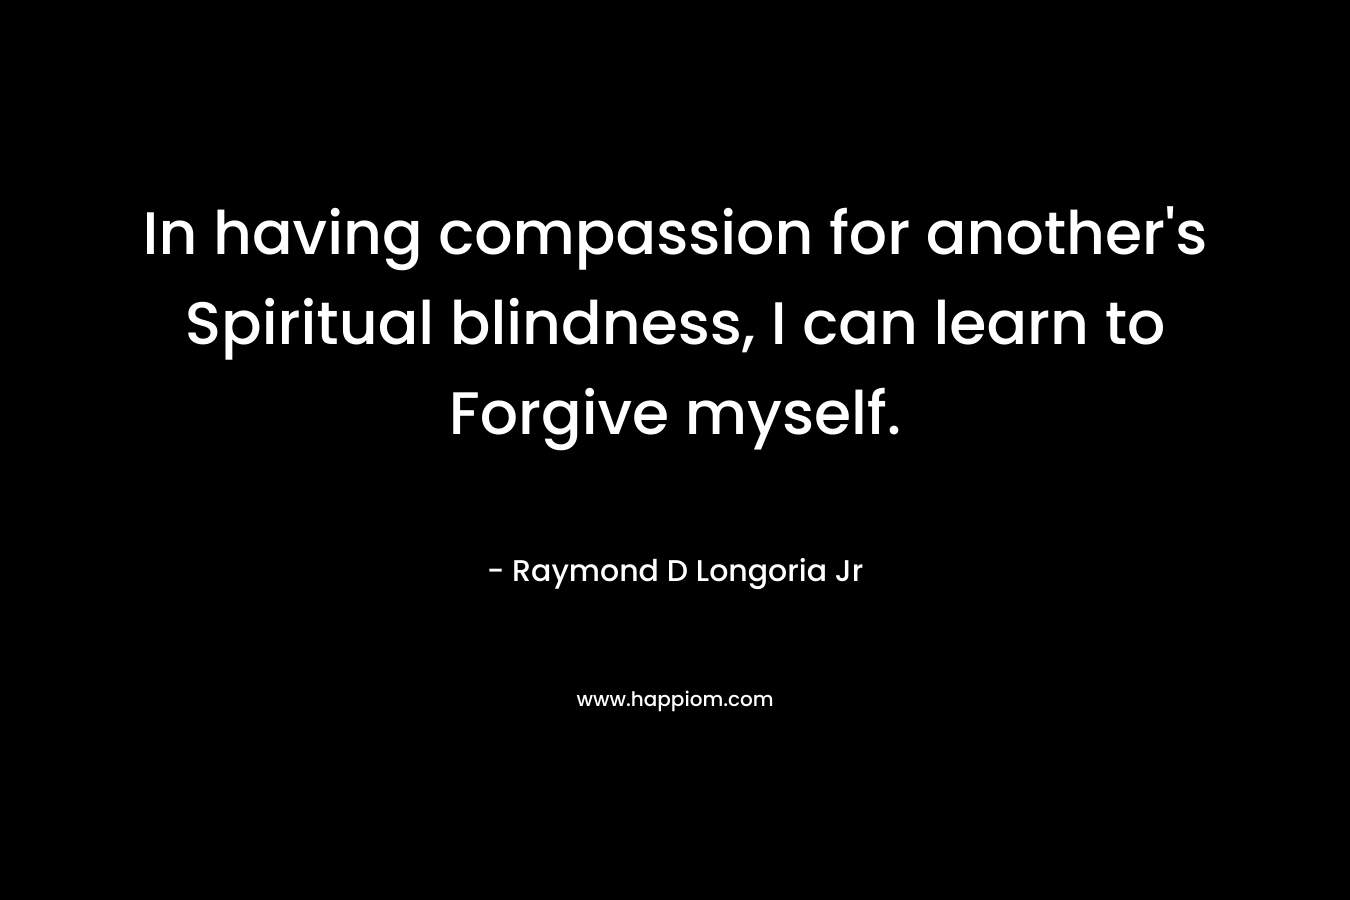 In having compassion for another's Spiritual blindness, I can learn to Forgive myself.